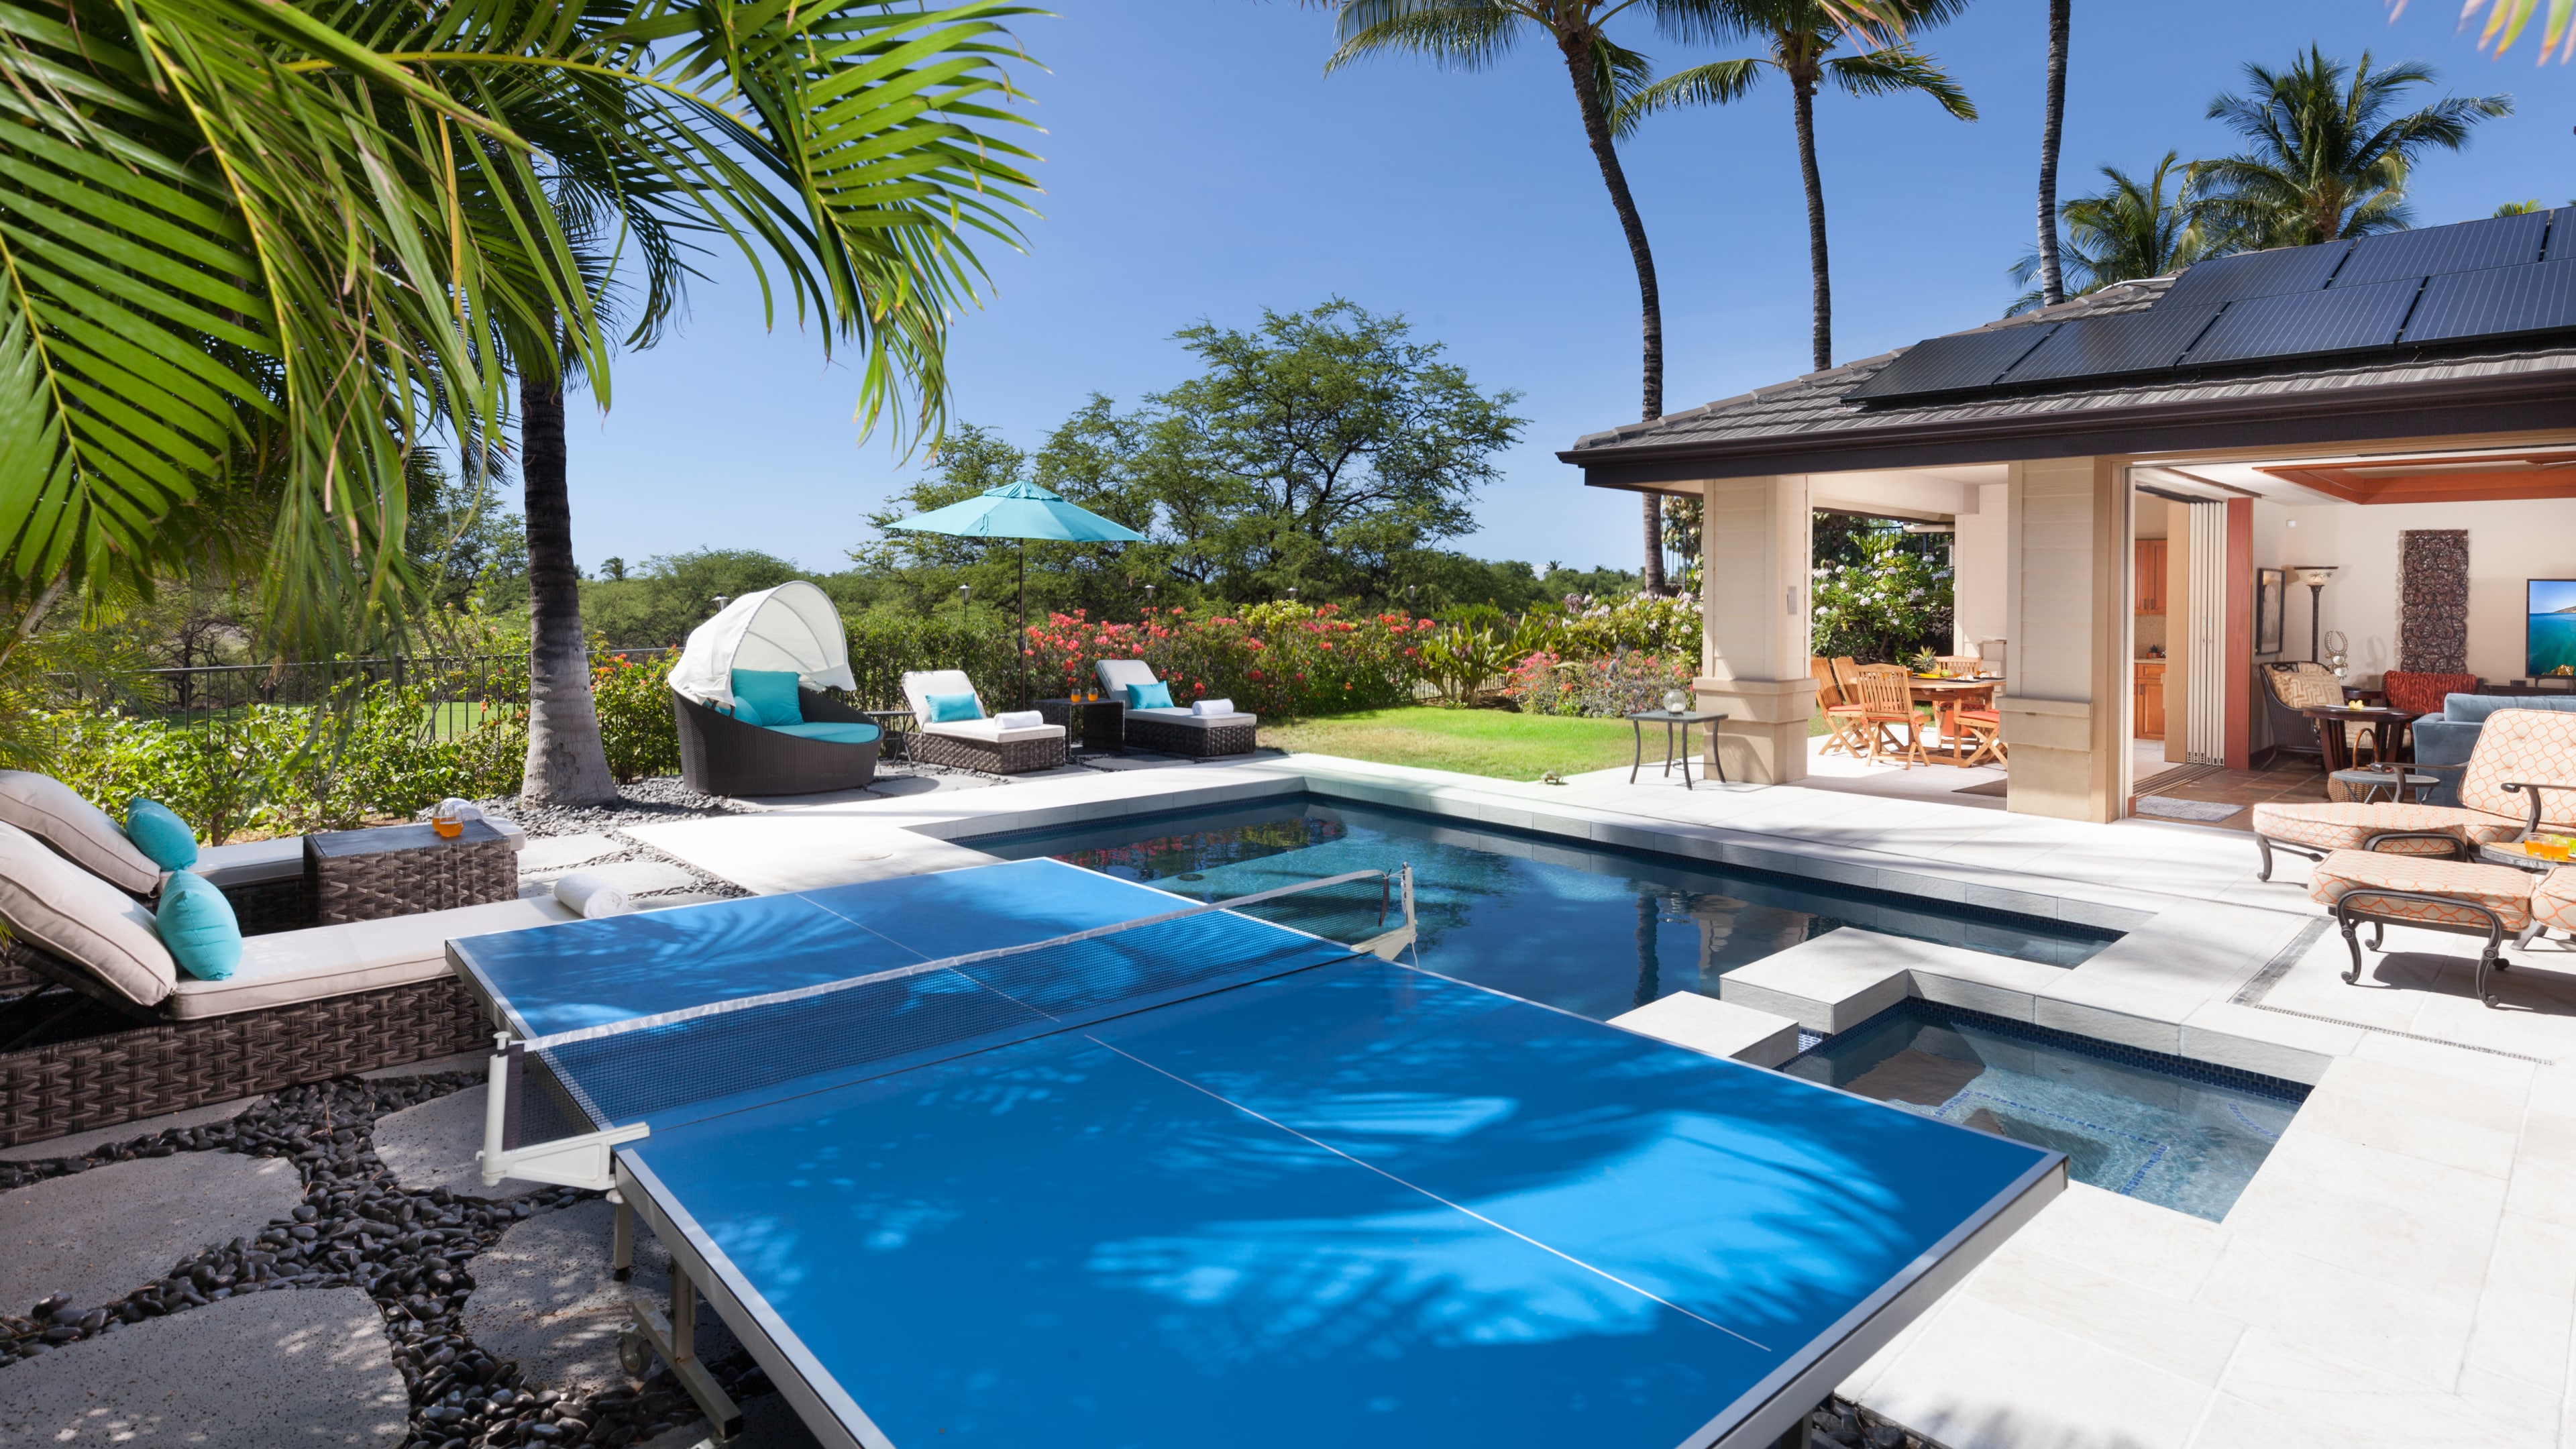 Welcome to Seabreeze - private backyard pool, spa, ping pong table and covered lanai for family fun